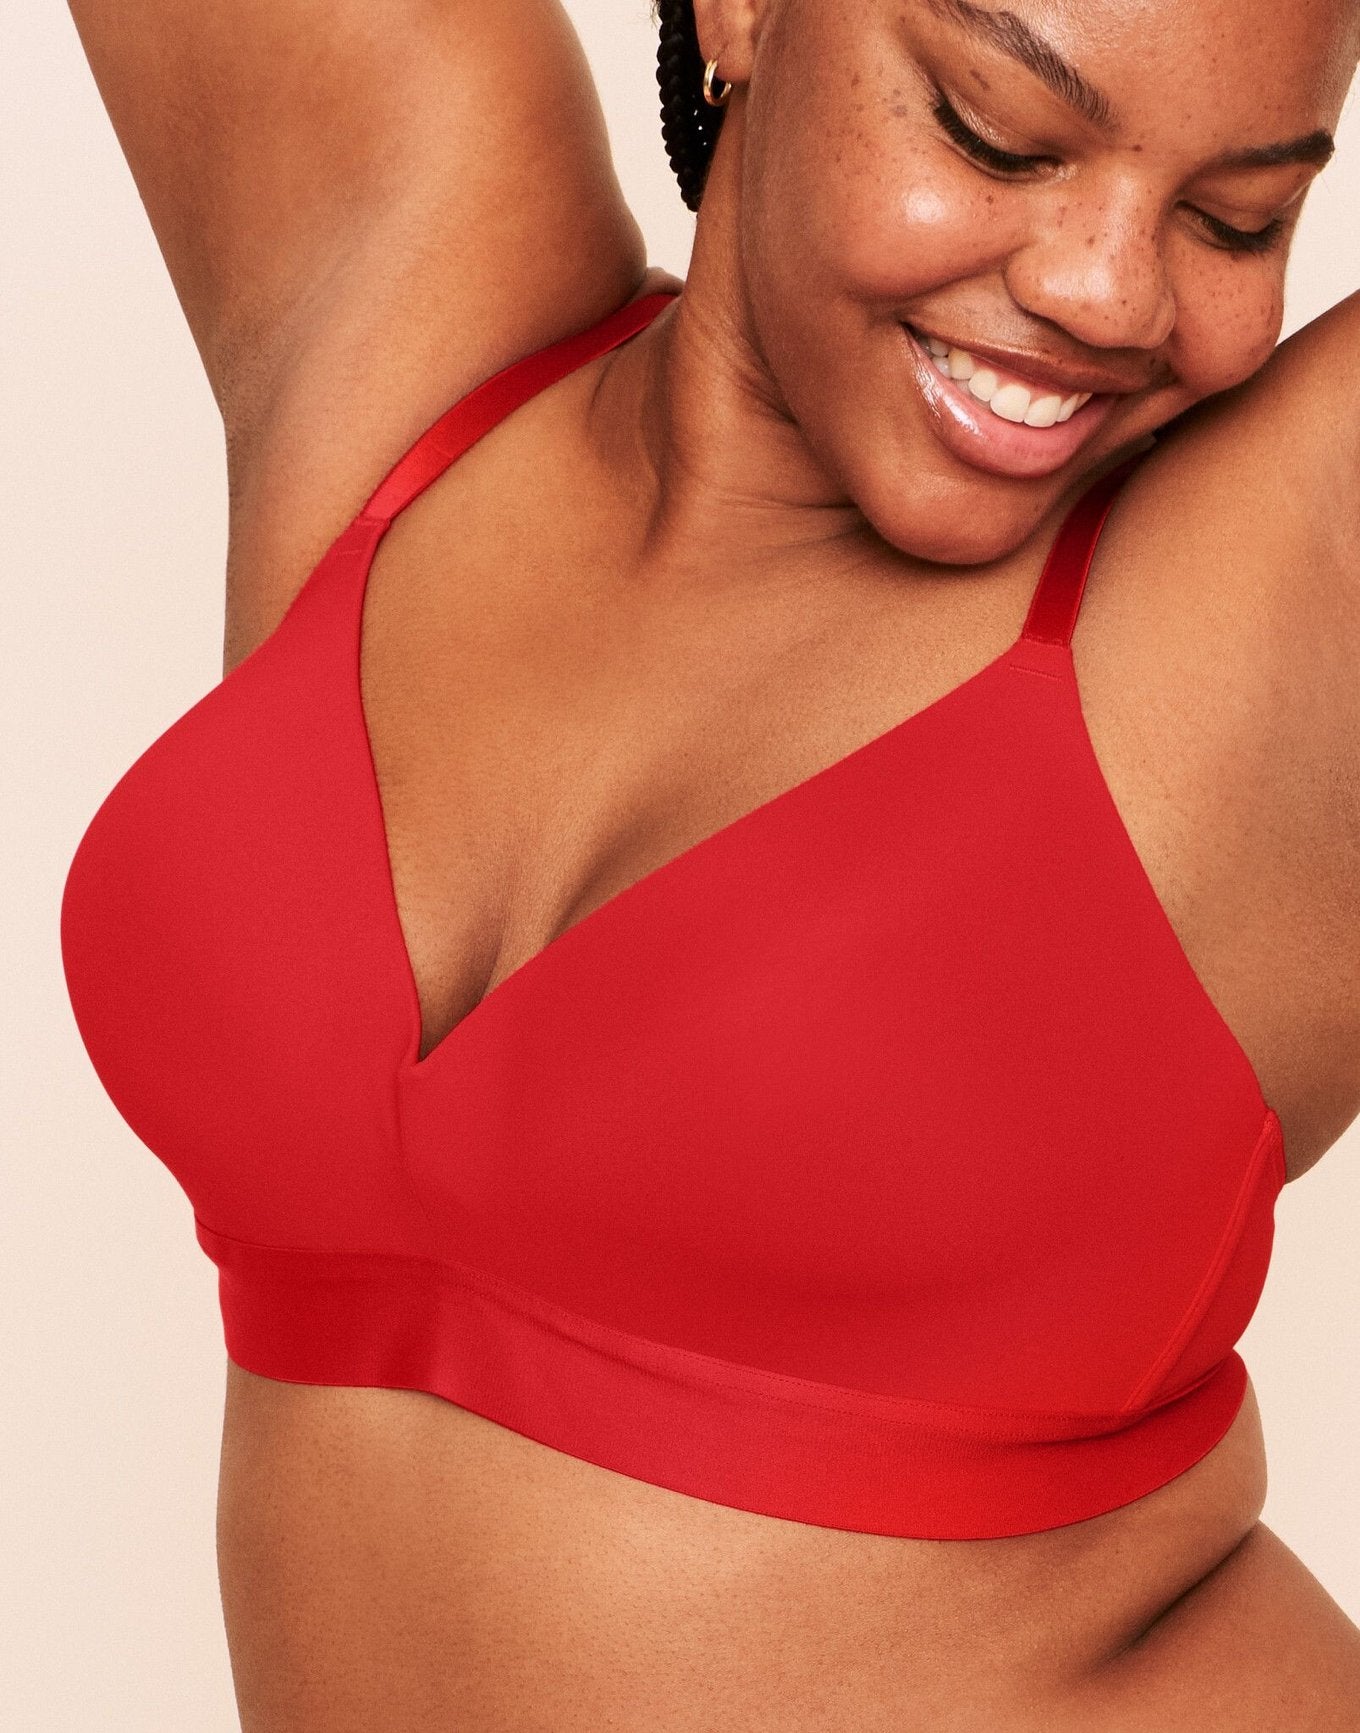 Earth Republic Makenna Lightly Lined Wireless Bra Wireless Bra in color Flame Scarlet and shape plunge